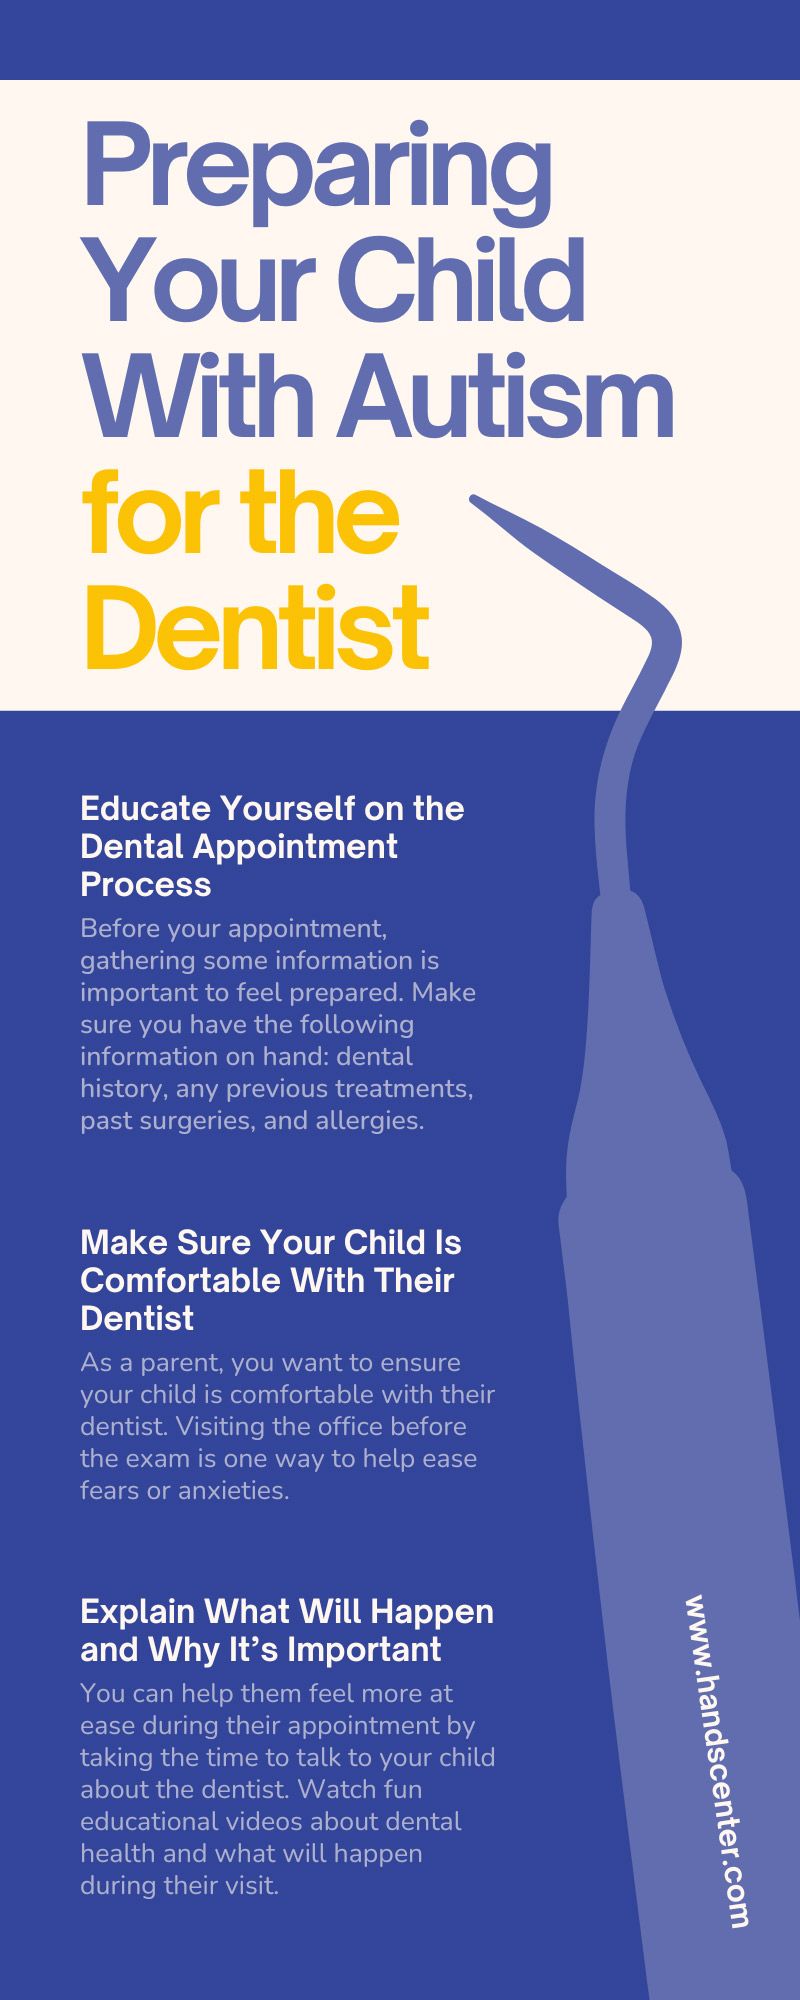 9 Tips for Preparing Your Child With Autism for the Dentist